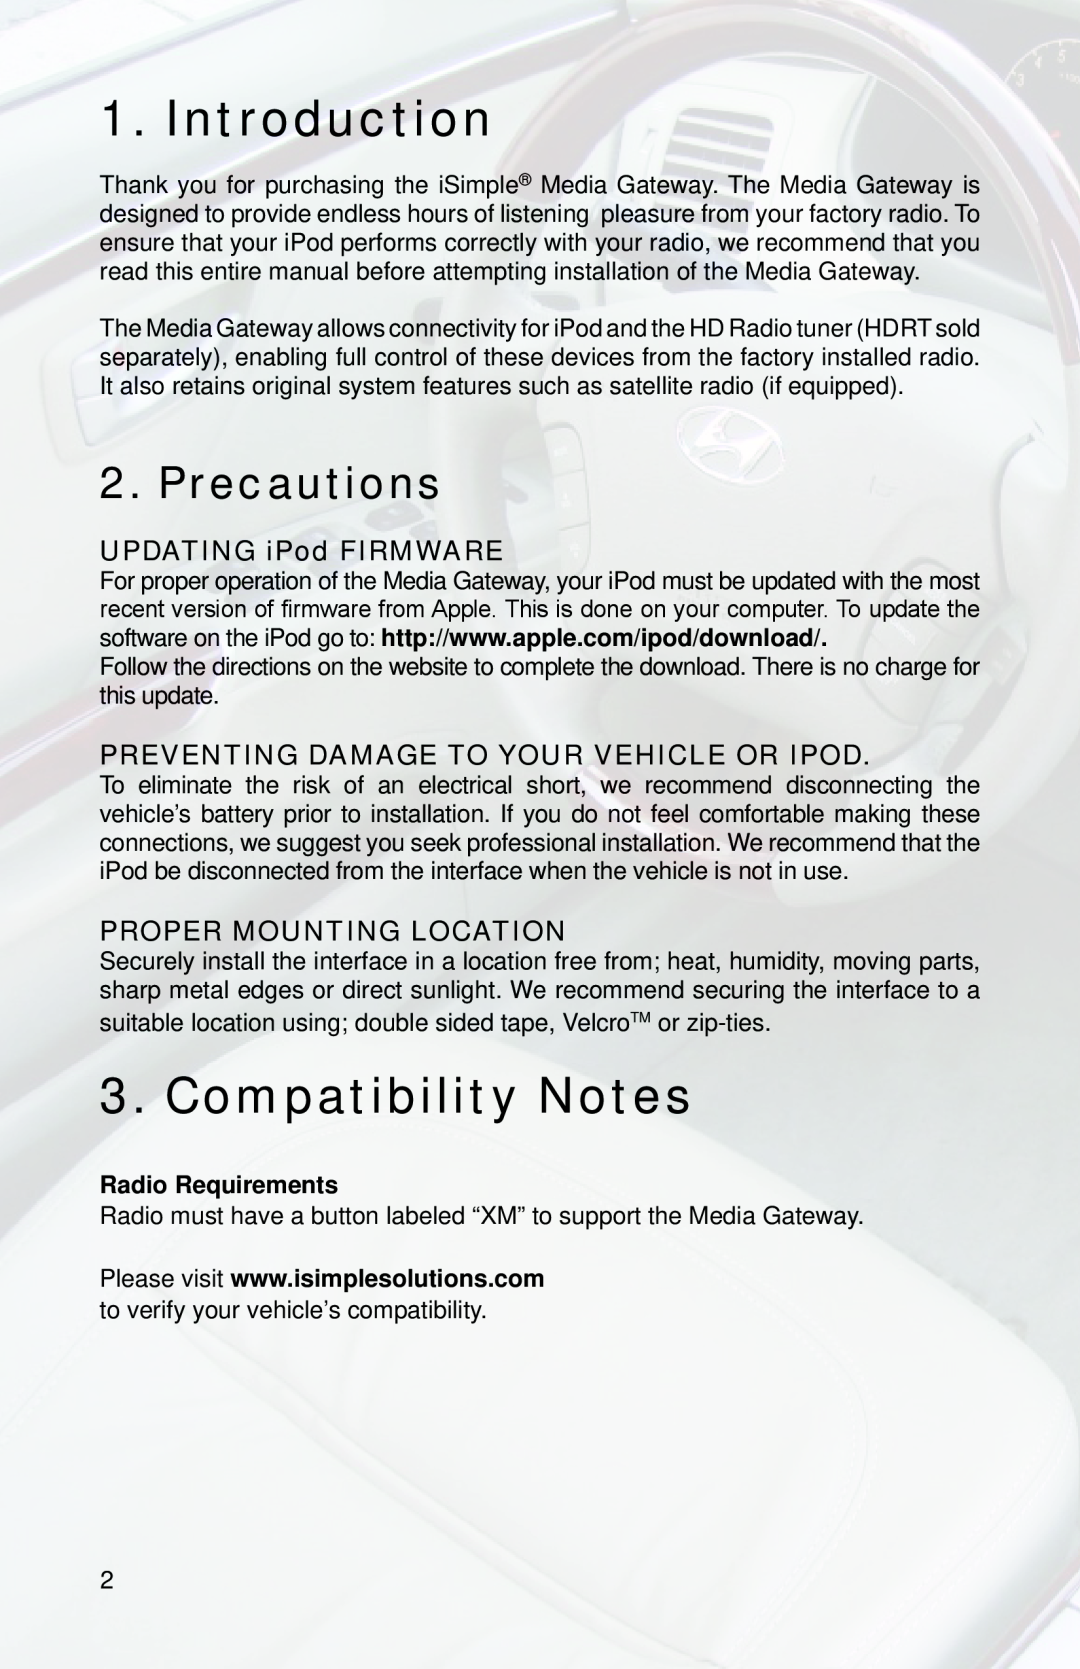 iSimple PGHHY1 Introduction, Compatibility Notes, Precautions, UPDATING iPod FIRMWARE, Proper Mounting Location 